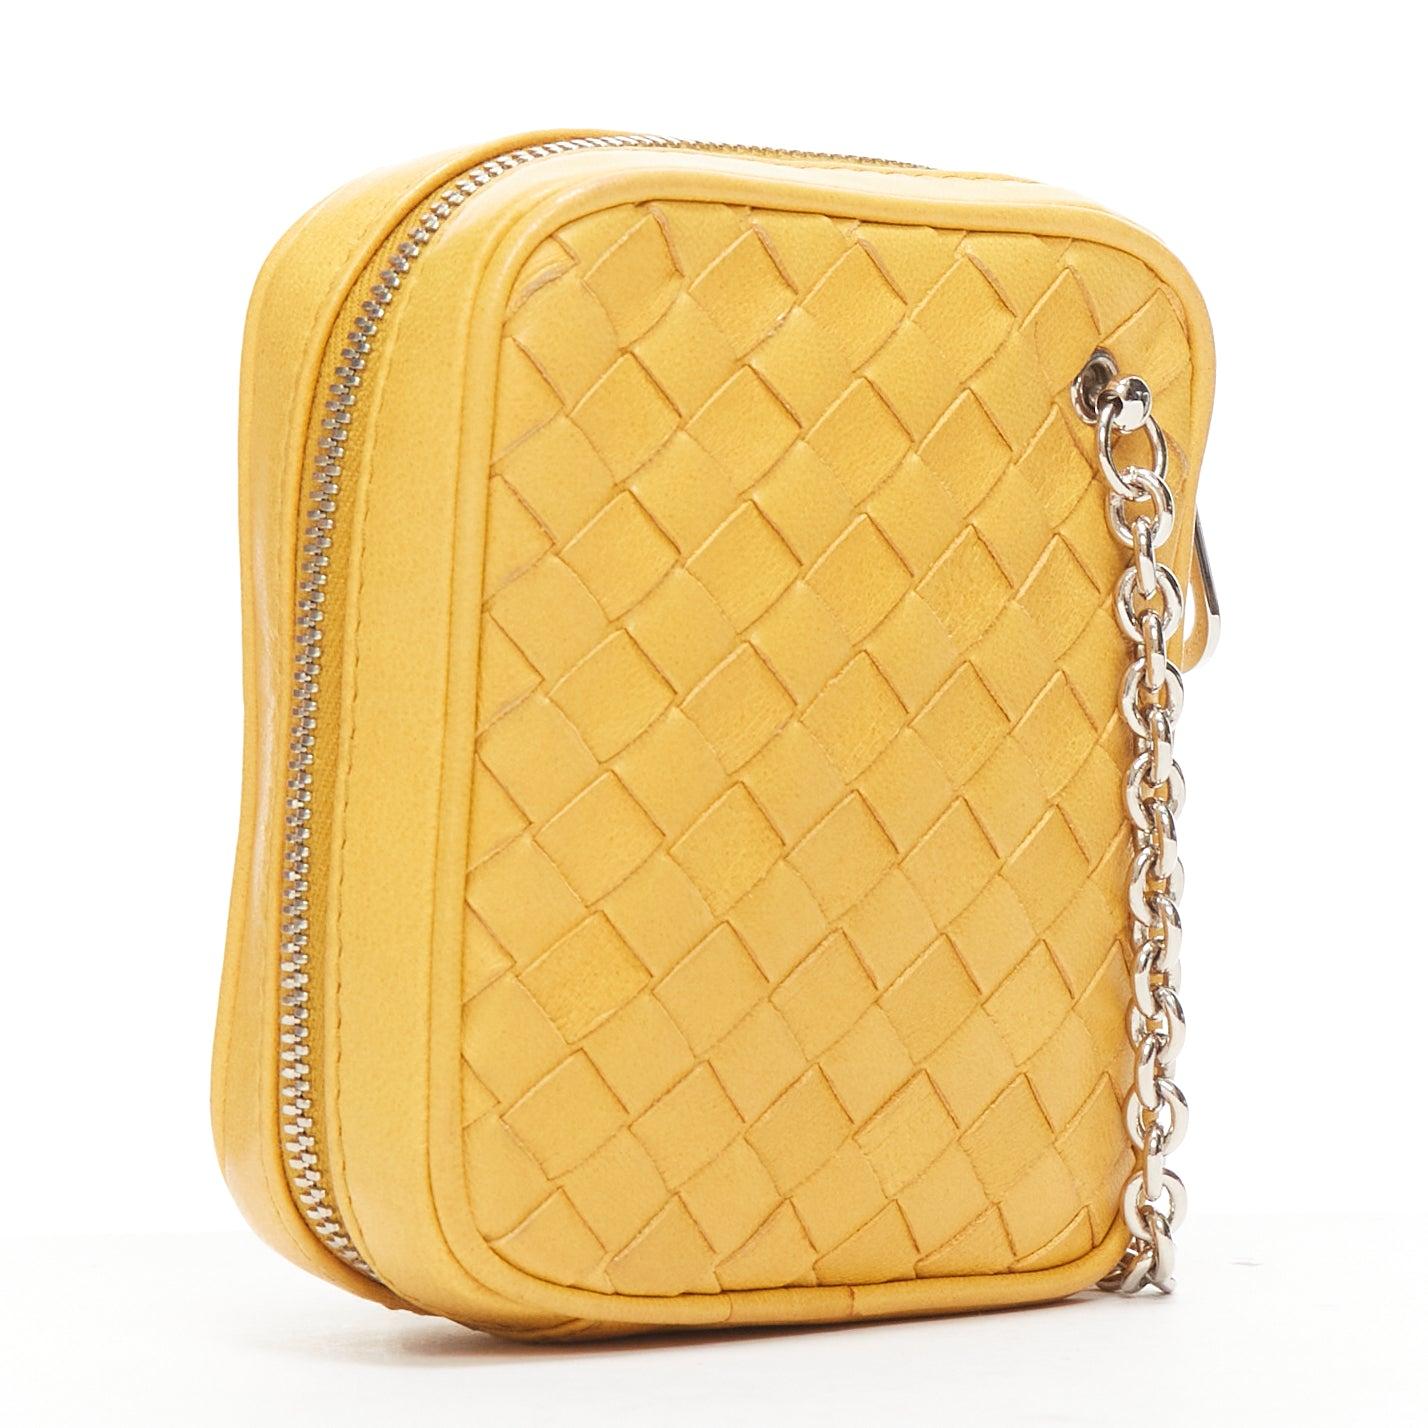 BOTTEGA VENETA butter yellow intrecciato woven silver chain wrist pouch bag
Reference: AAWC/A00991
Brand: Bottega Veneta
Material: Leather
Color: Yellow, Silver
Pattern: Solid
Closure: Zip
Lining: Nude Fabric
Made in: Italy

CONDITION:
Condition: